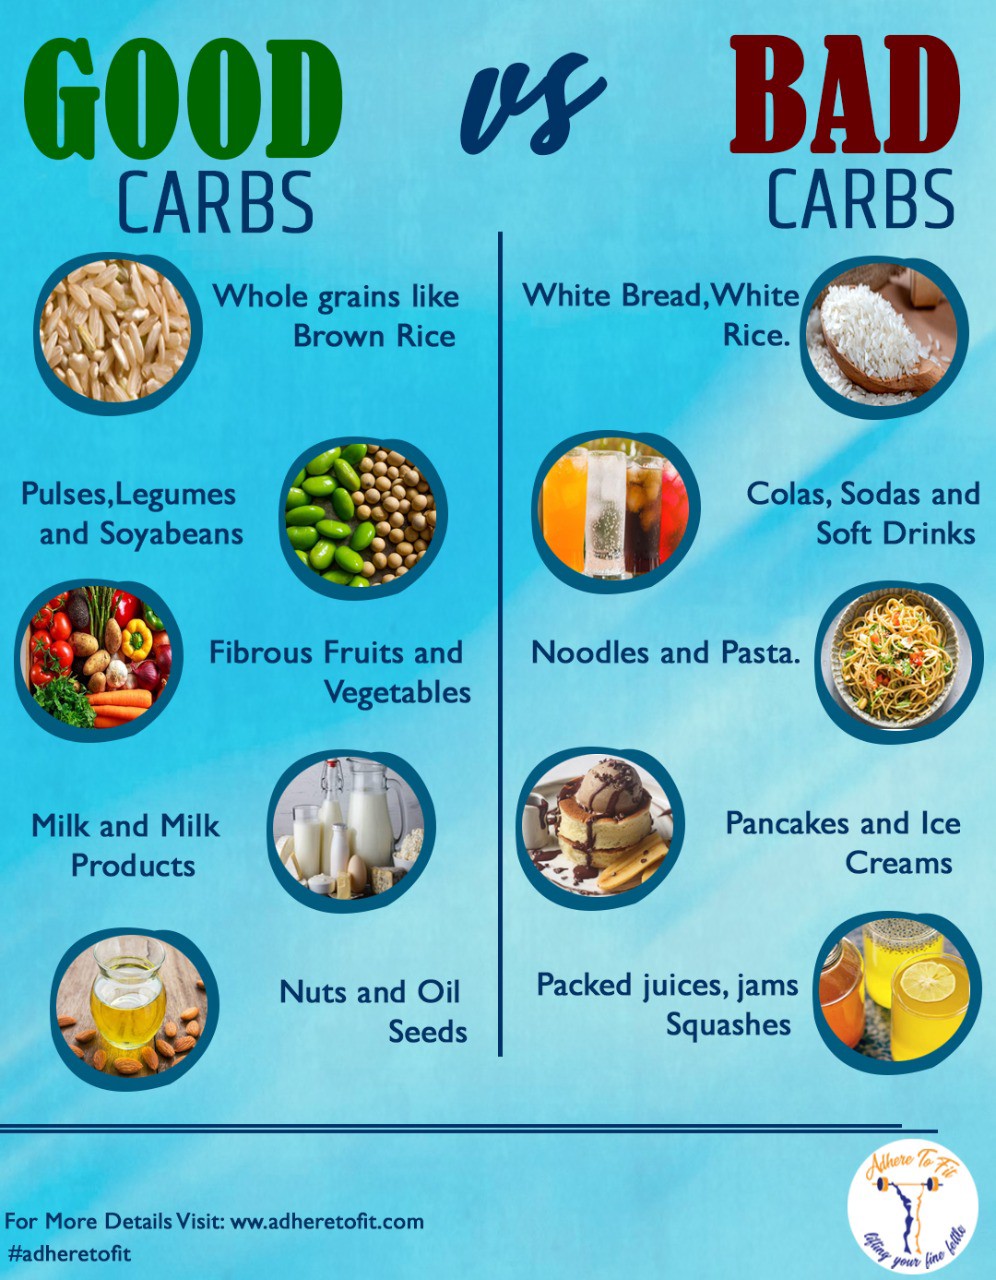 chandigarh, Good Carbs vs Bad Carbs | by Adhere To Fit | Medium